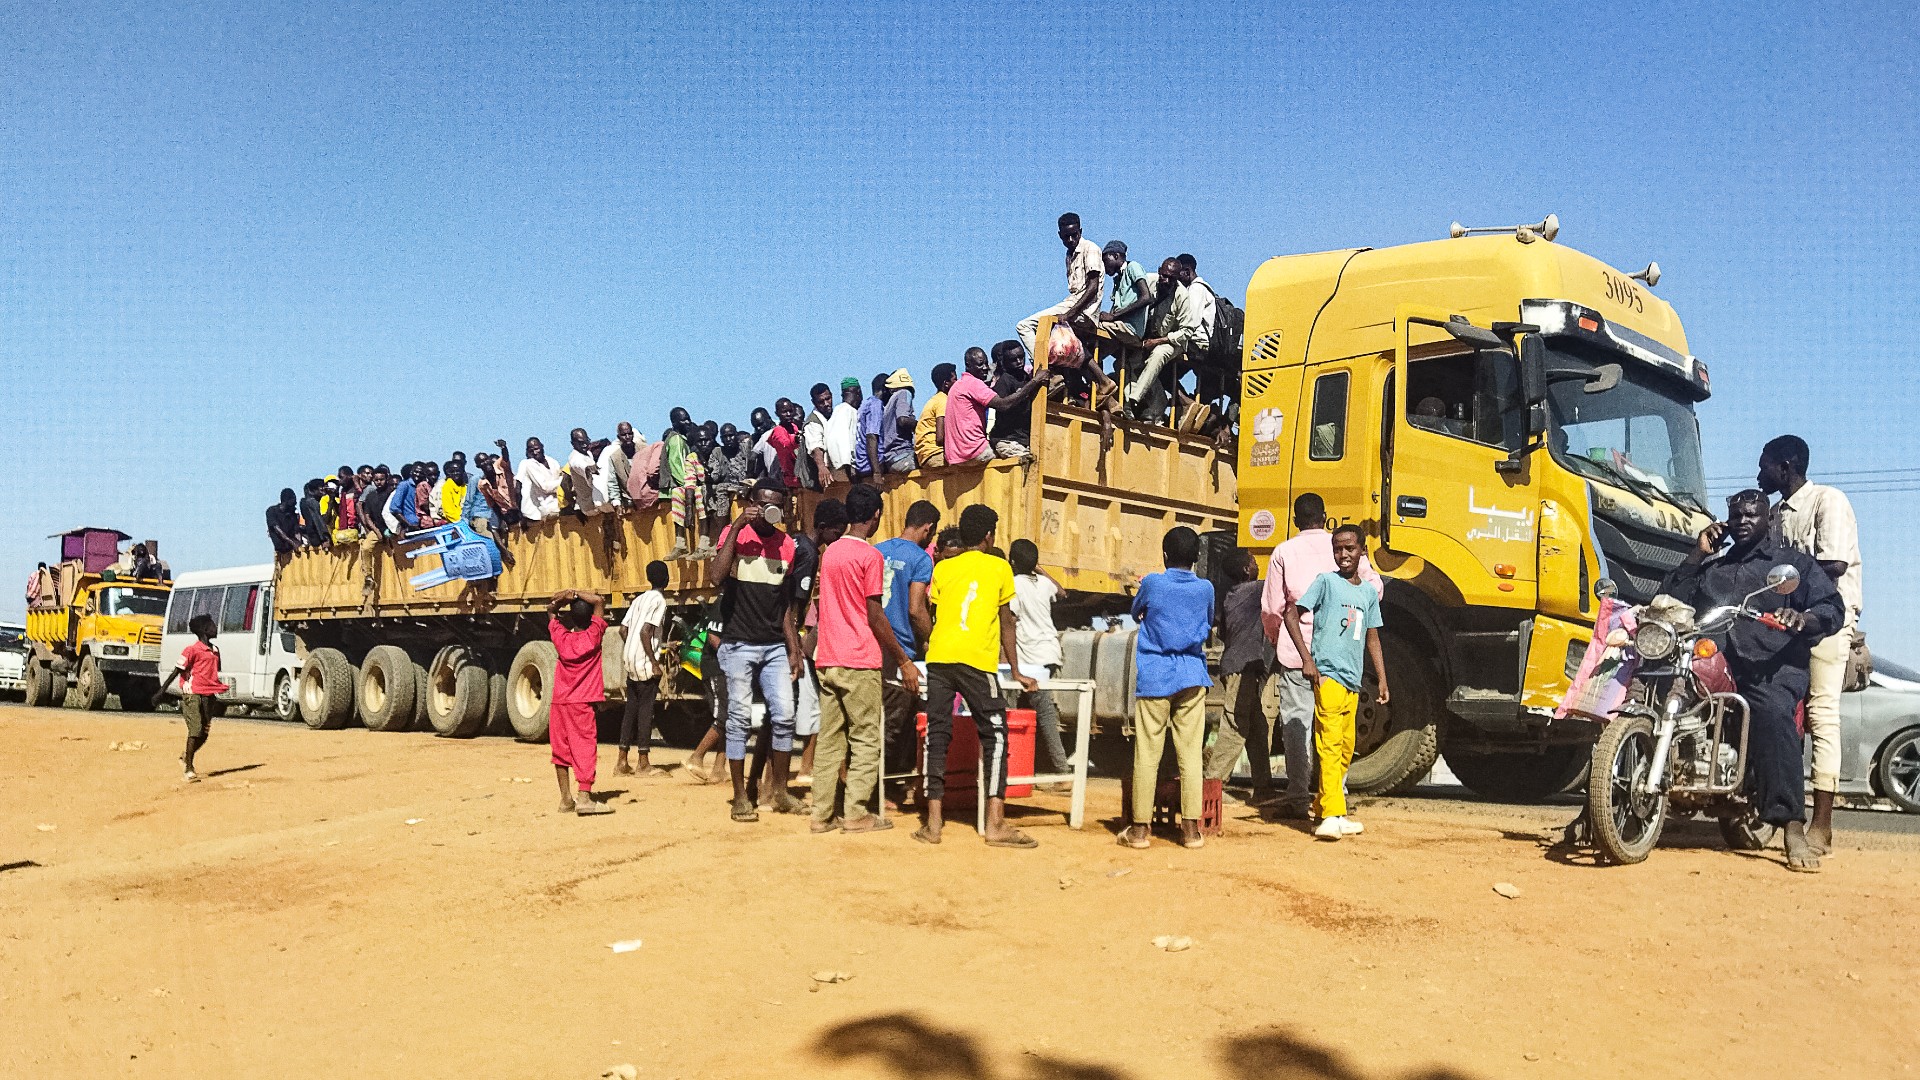 People displaced by the conflict in Sudan get on top of the back of a truck moving along a road in Wad Madani, 16 December (AFP)